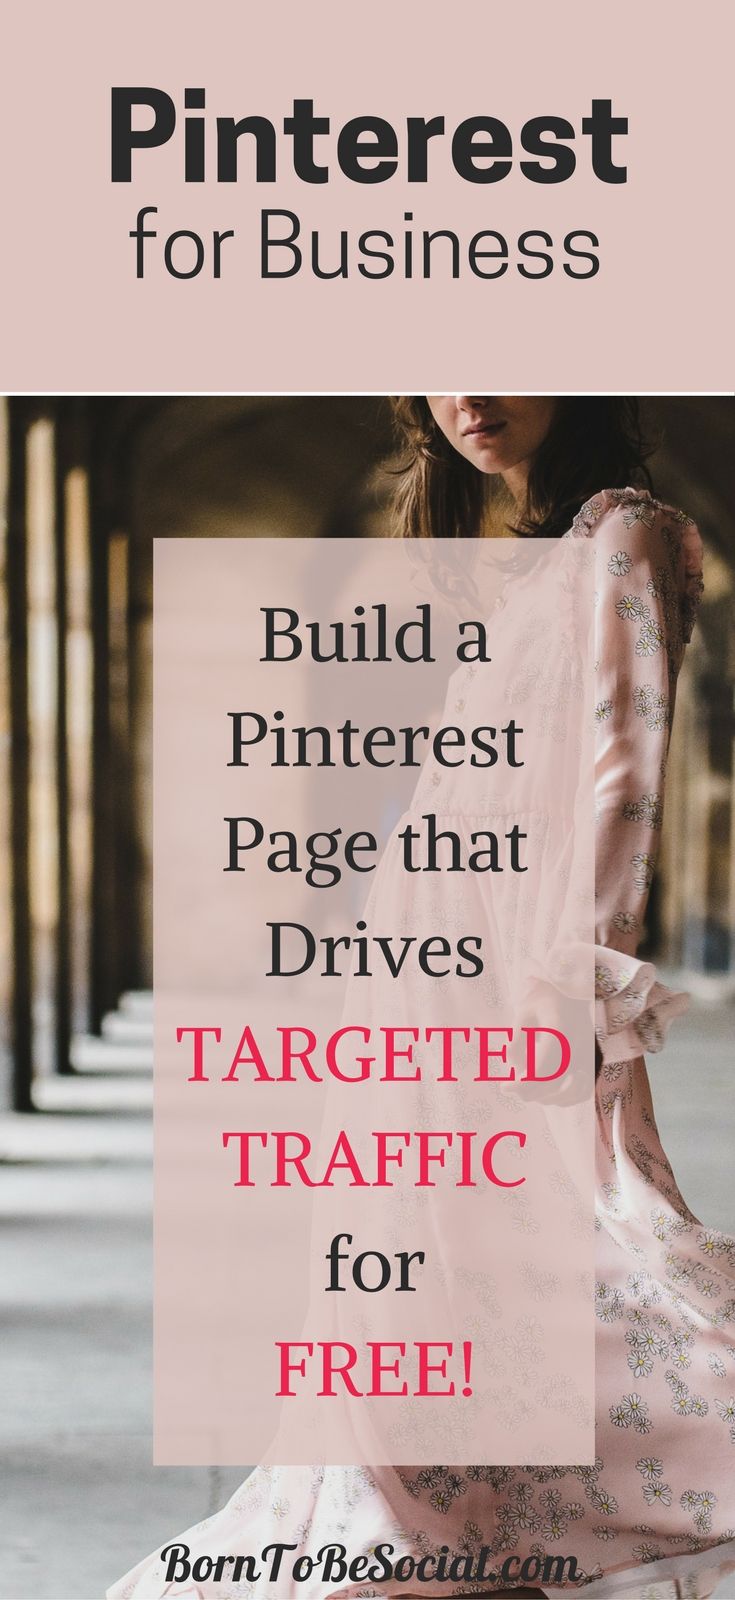 Build a Pinterest Page that Drives TARGETED (& Free!) SITE TRAFFIC. Learn how to build a PERFECT Pinterest page that attracts your ideal client and sends highly targeted traffic to your website. | via @BornToBeSocial, Pinterest Marketing & Consulting | Pinterest for Business #ExpertPinterest #PinterestForBusiness #PinterestMarketingTips #Pinterest